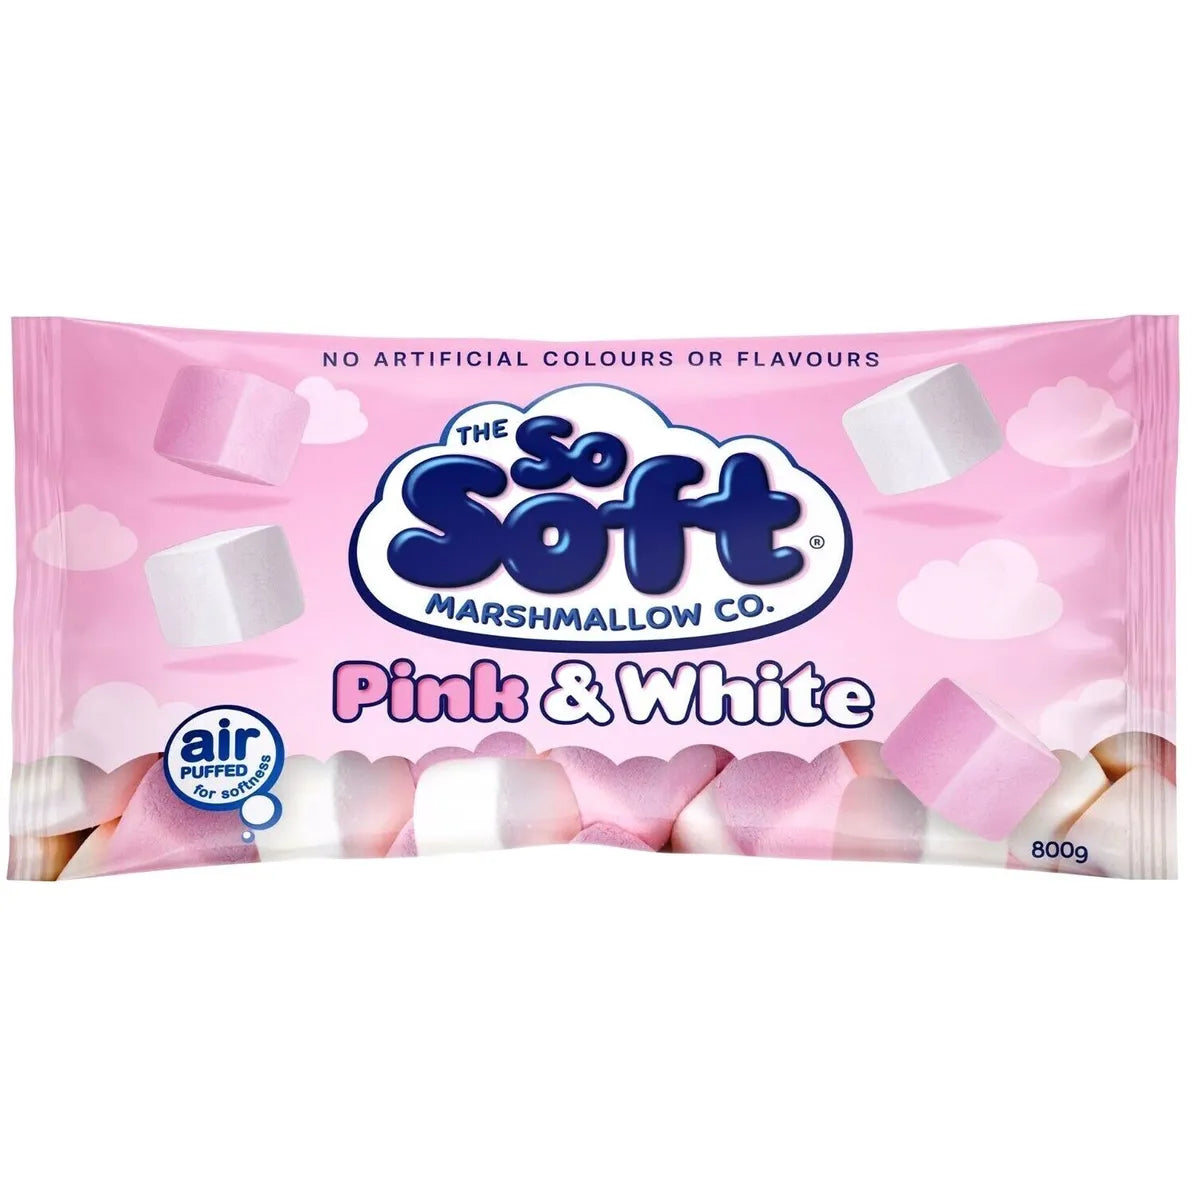 The So Soft Pink & White Air Puffed Marshmallow - 800g